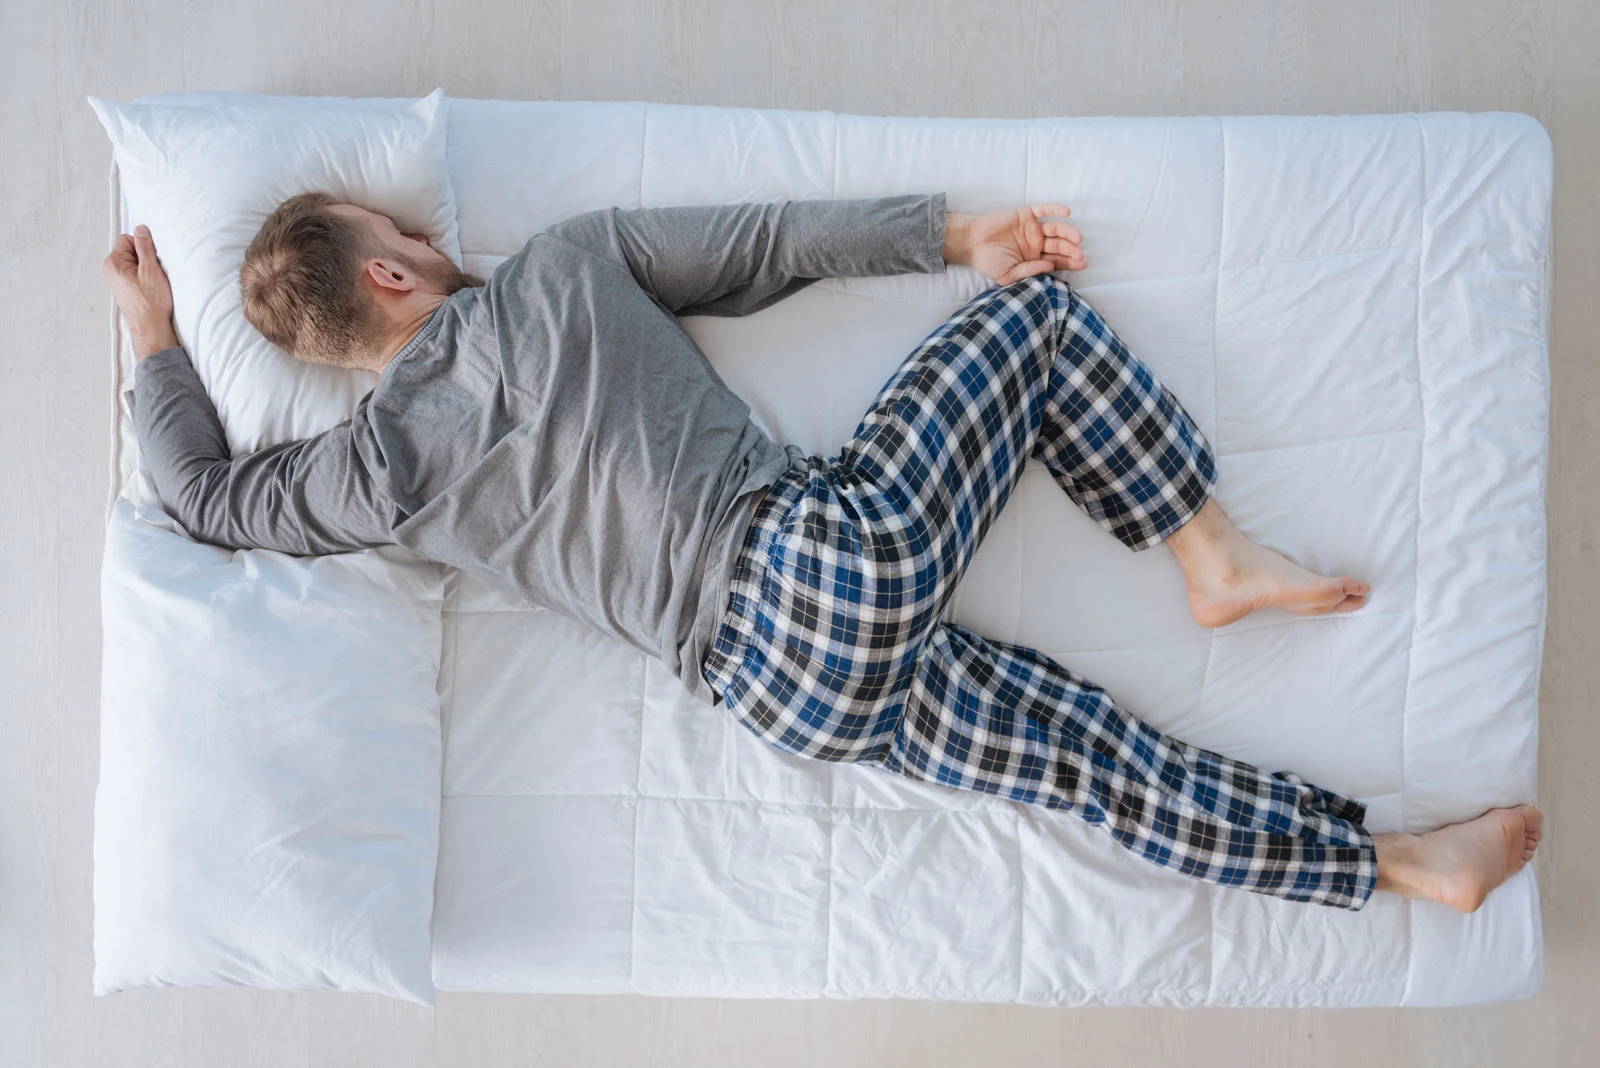 Which Sleep Position is the Best Sleep Position?